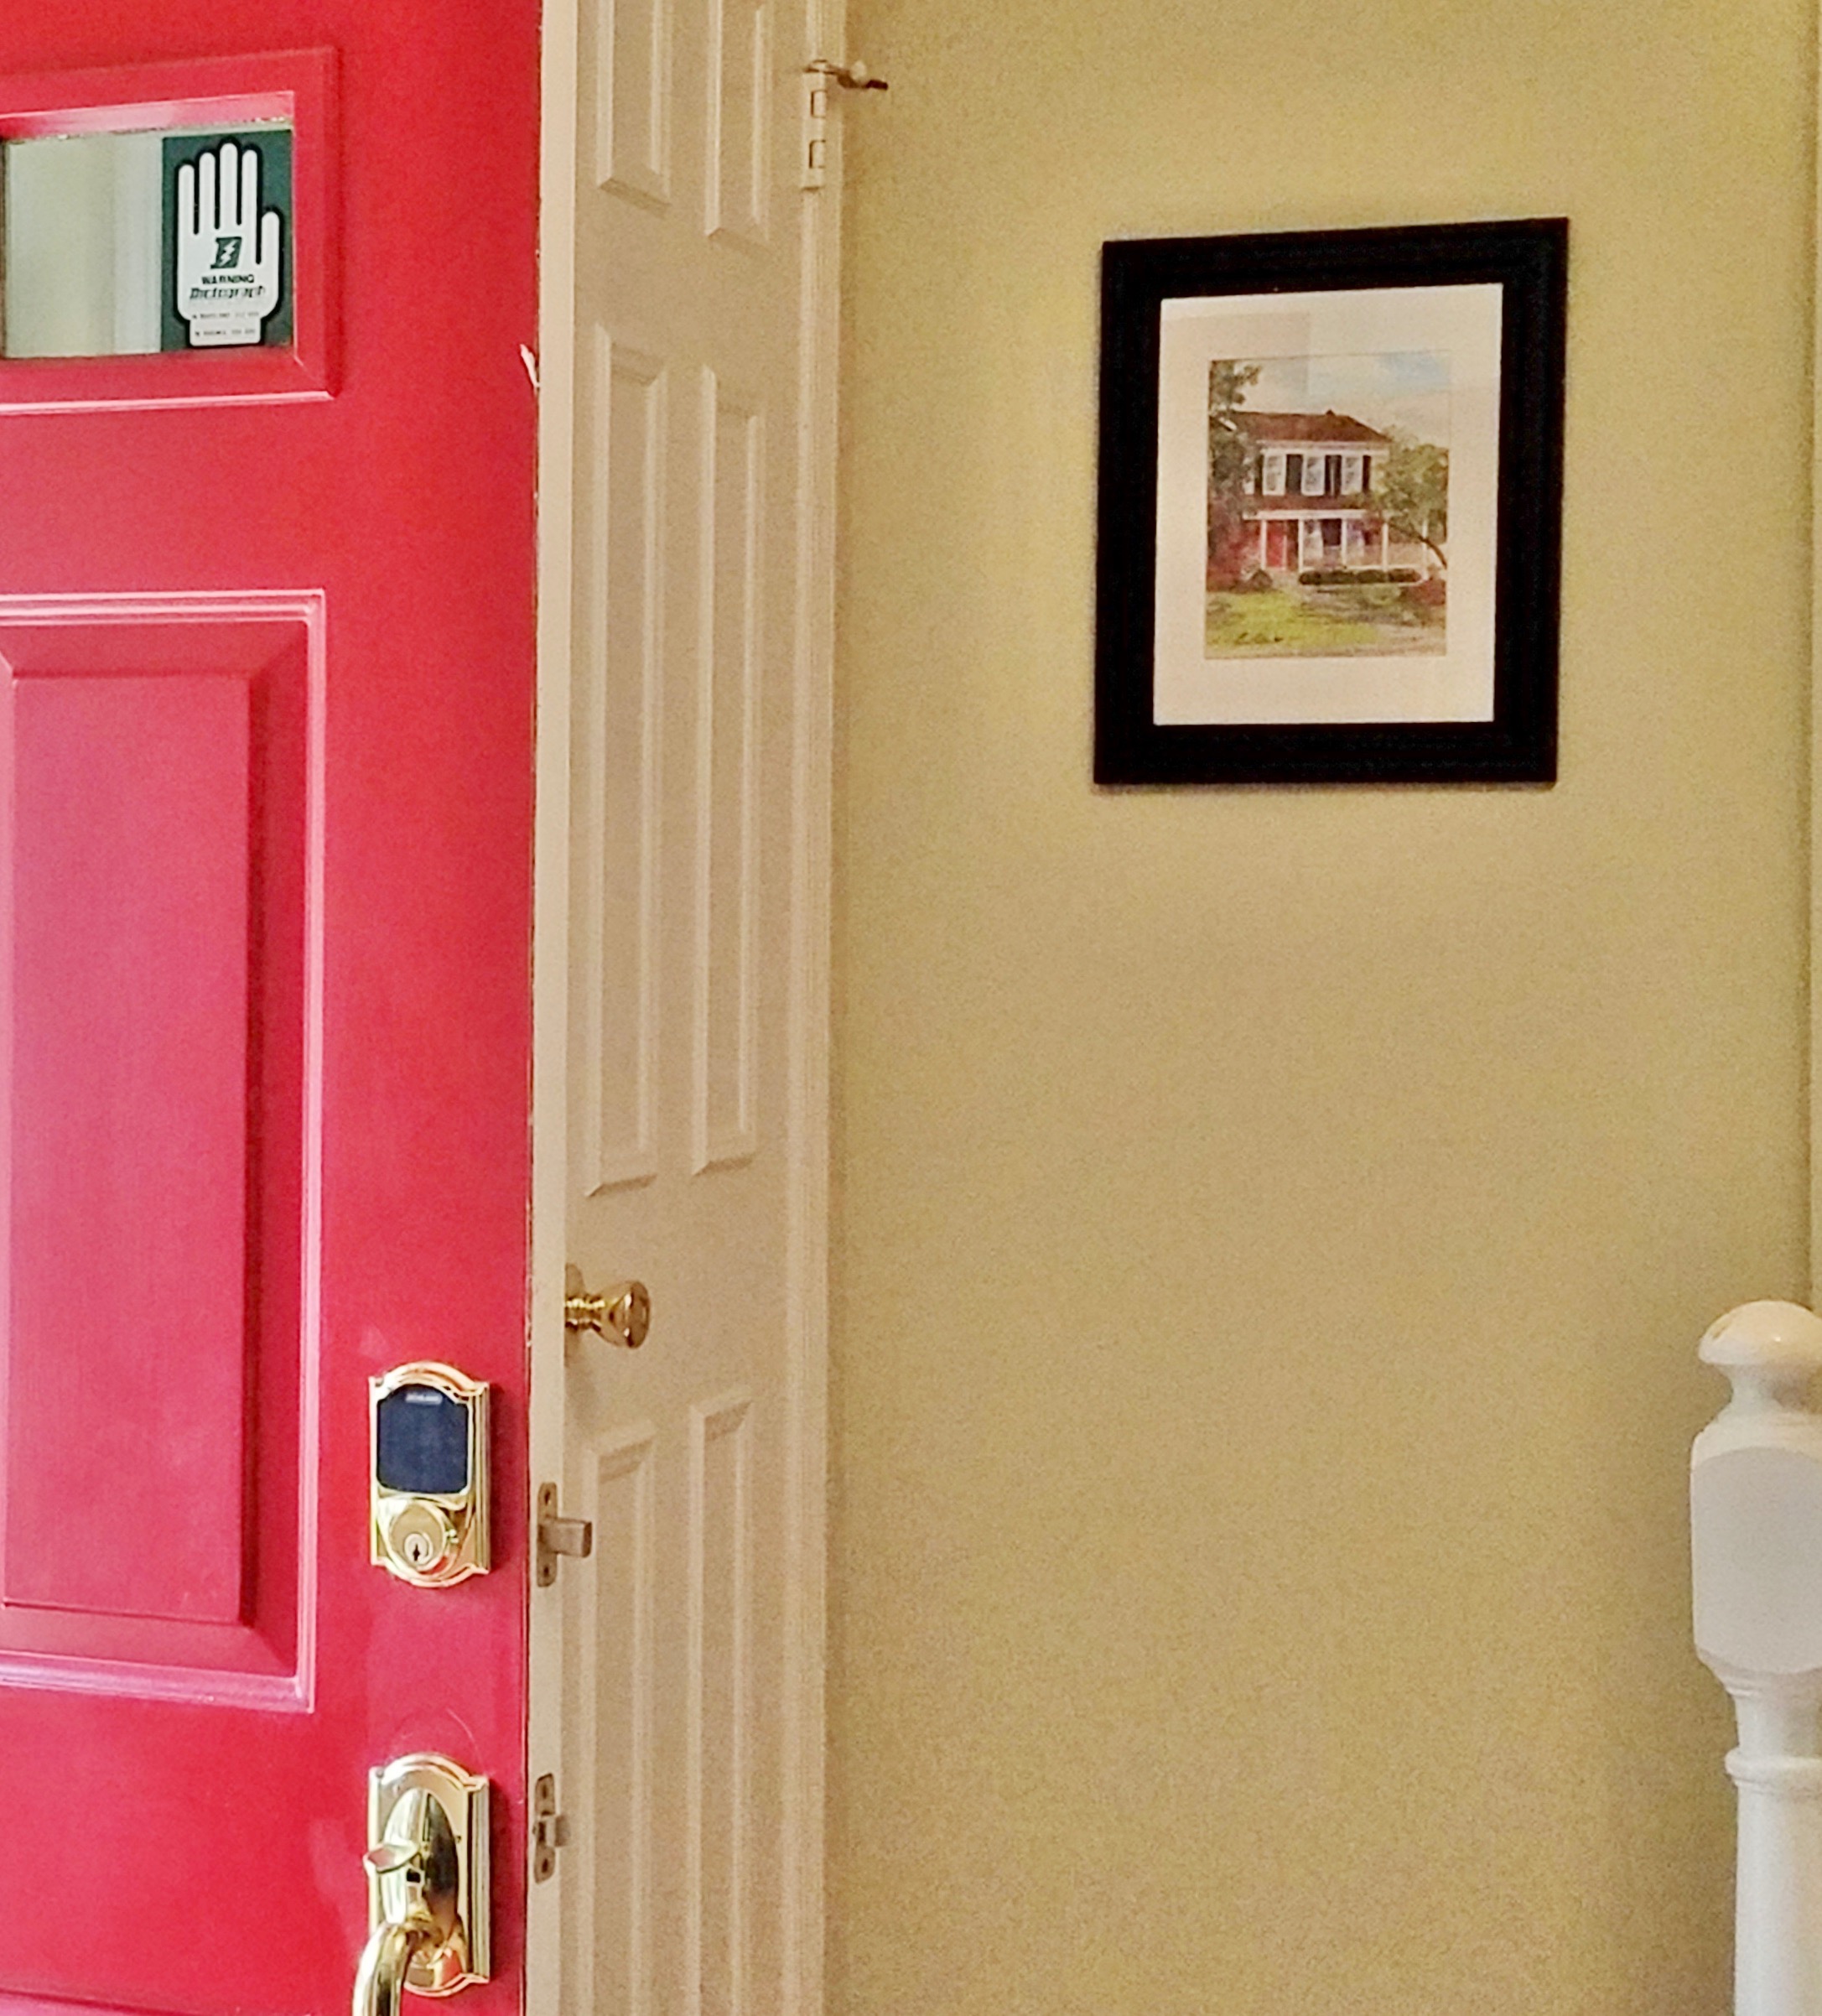 My Chevy Chase MD client hangs her house portrait by the front door.